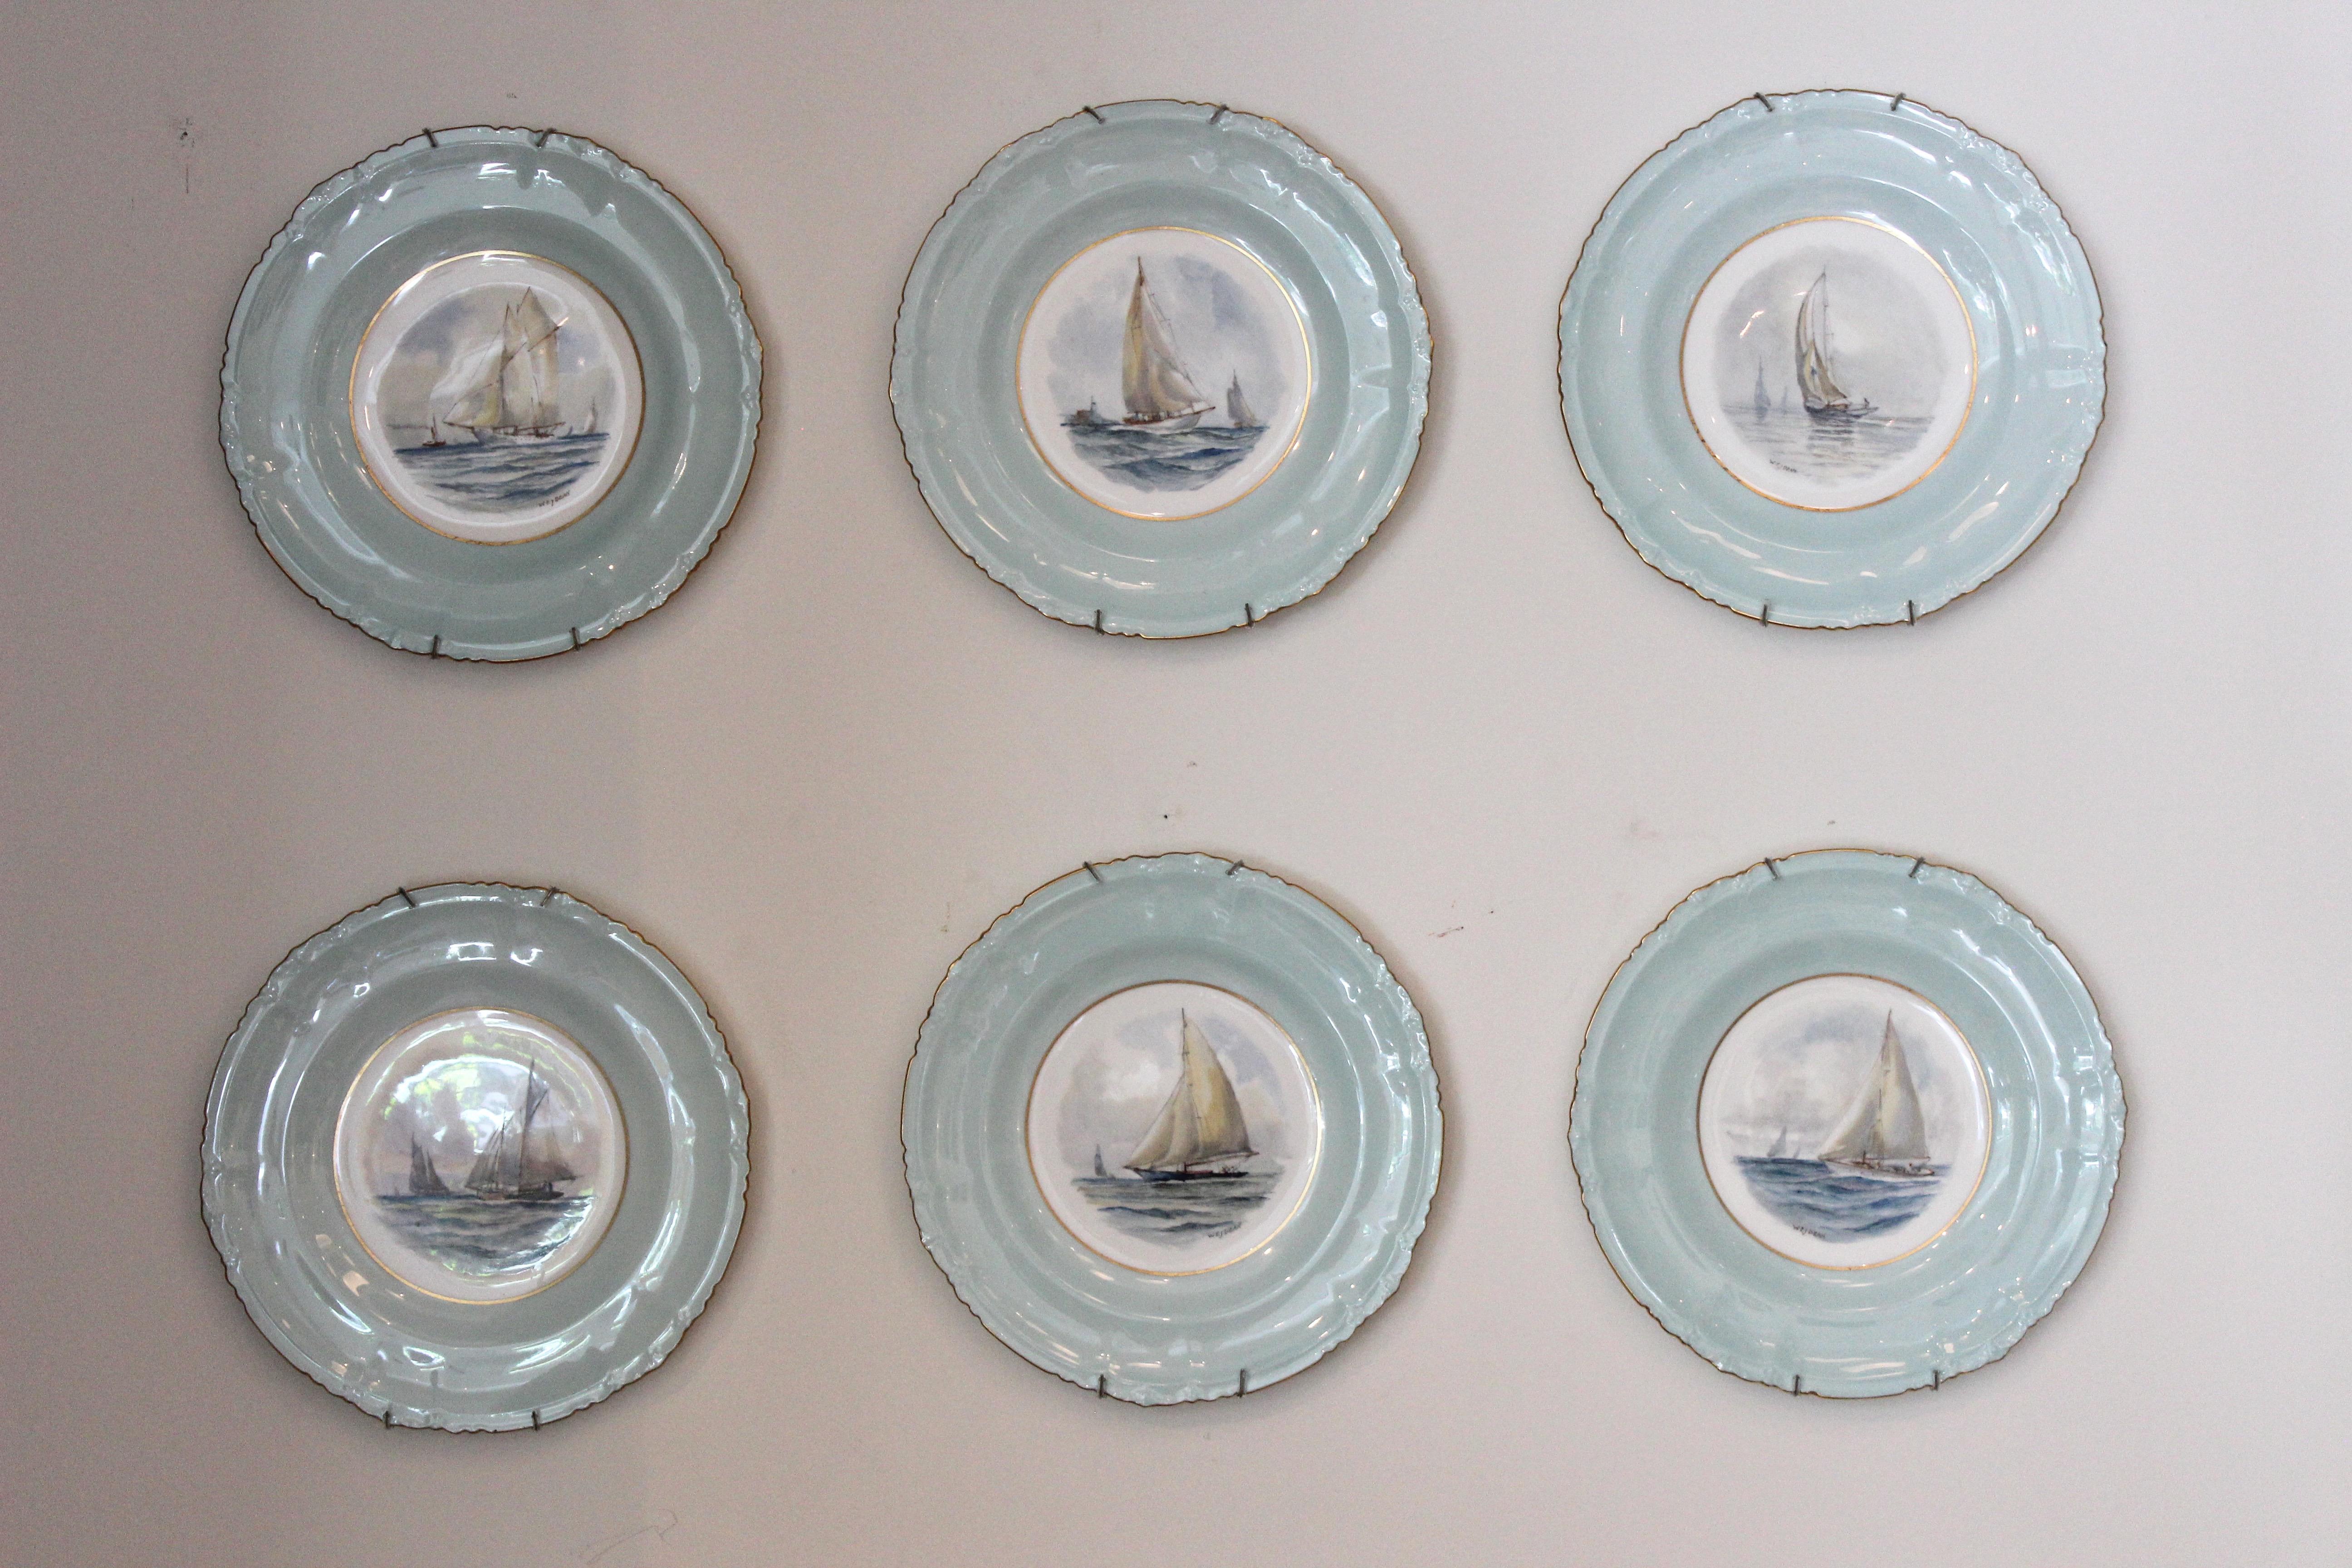 Set of 12 Royal crown derby porcelain plates with hand-painted yachting scenes... each plate is stamped and identified on the reverse. Signed Wej Dean.